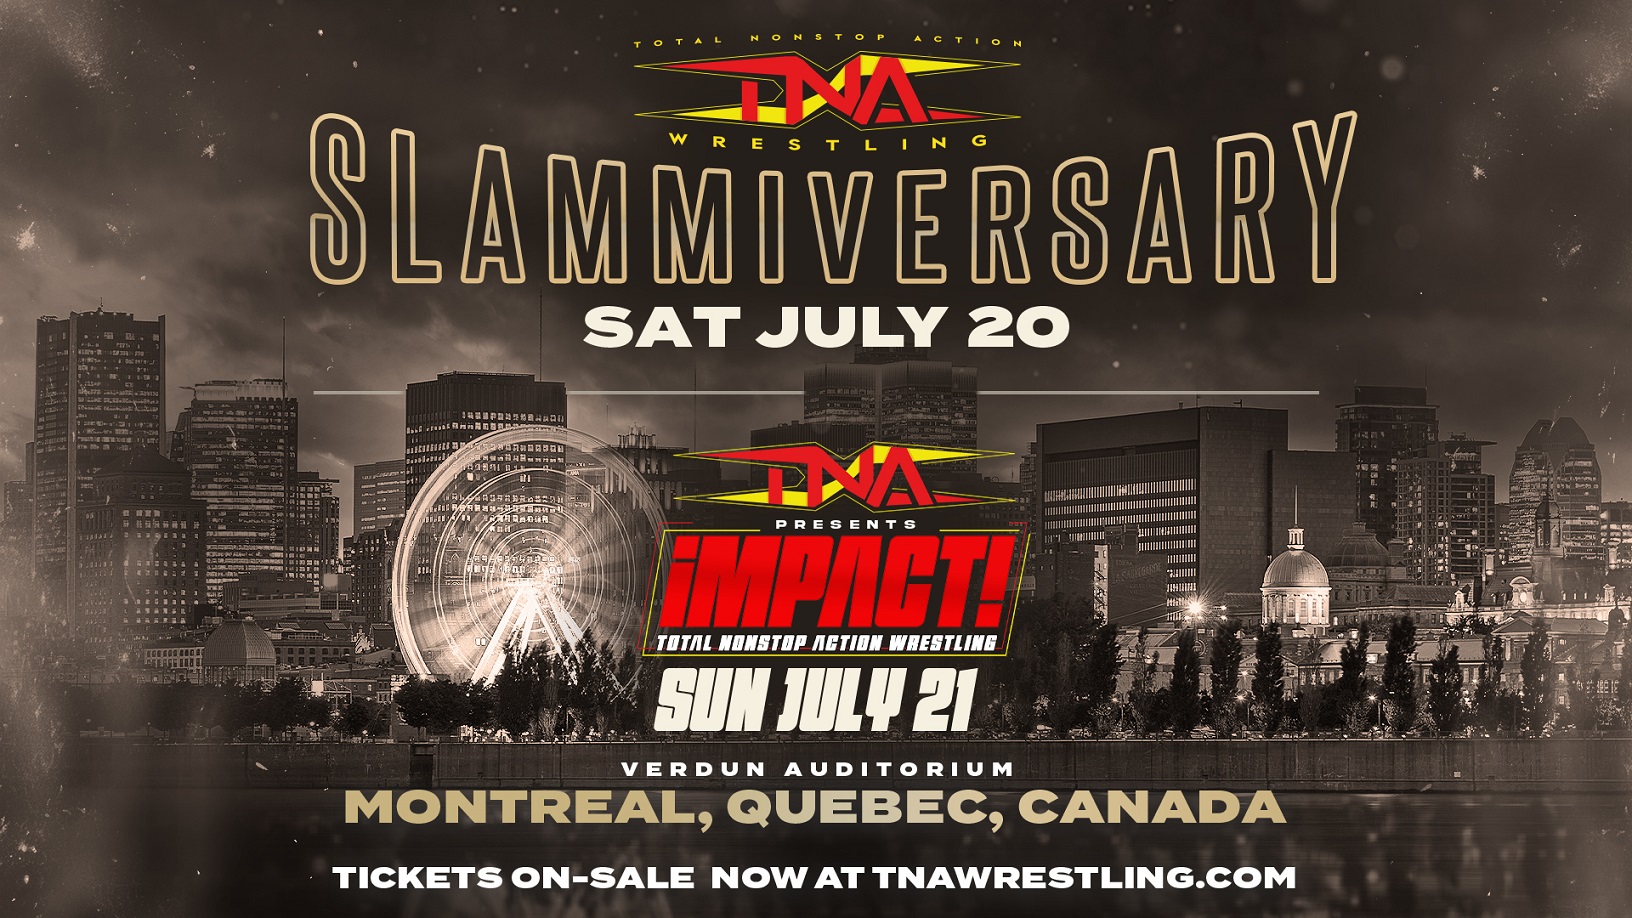 Slammiversary Opening Weekend Ticket Sales Are The Most In 10 Years – TNA Wrestling